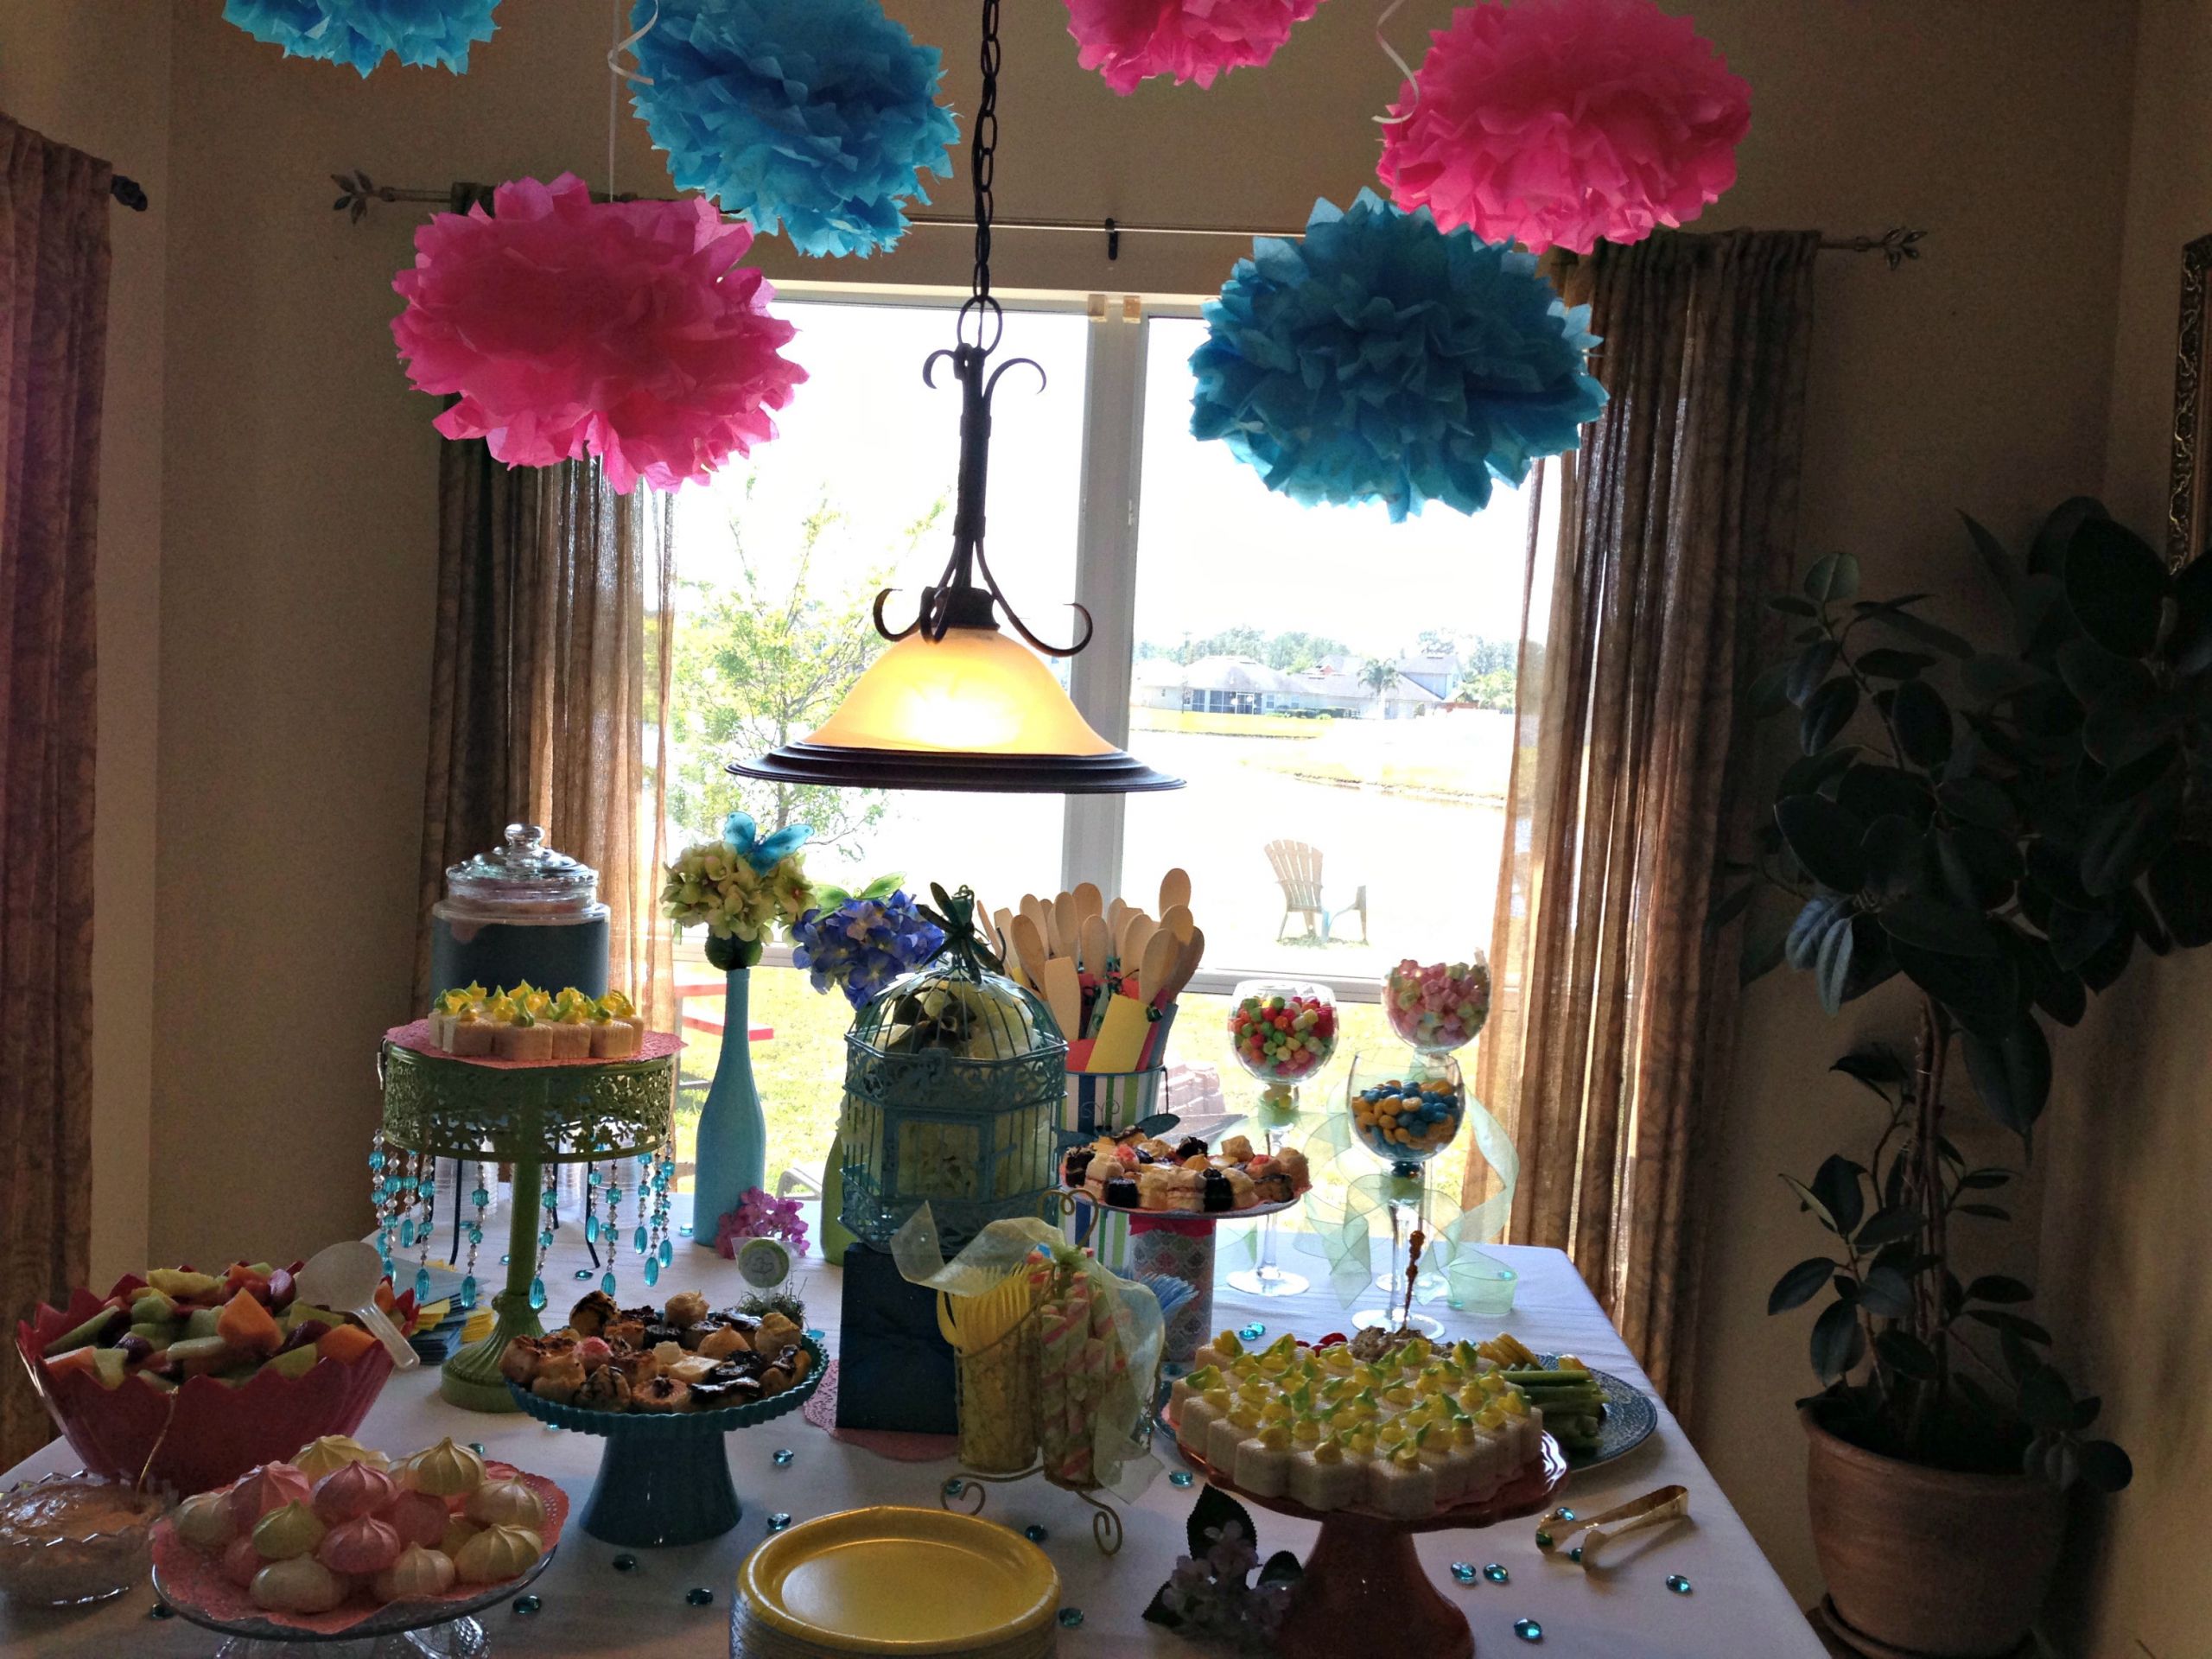 Engagement Party Ideas On Pinterest
 The Adored Home Bridal Shower Ideas